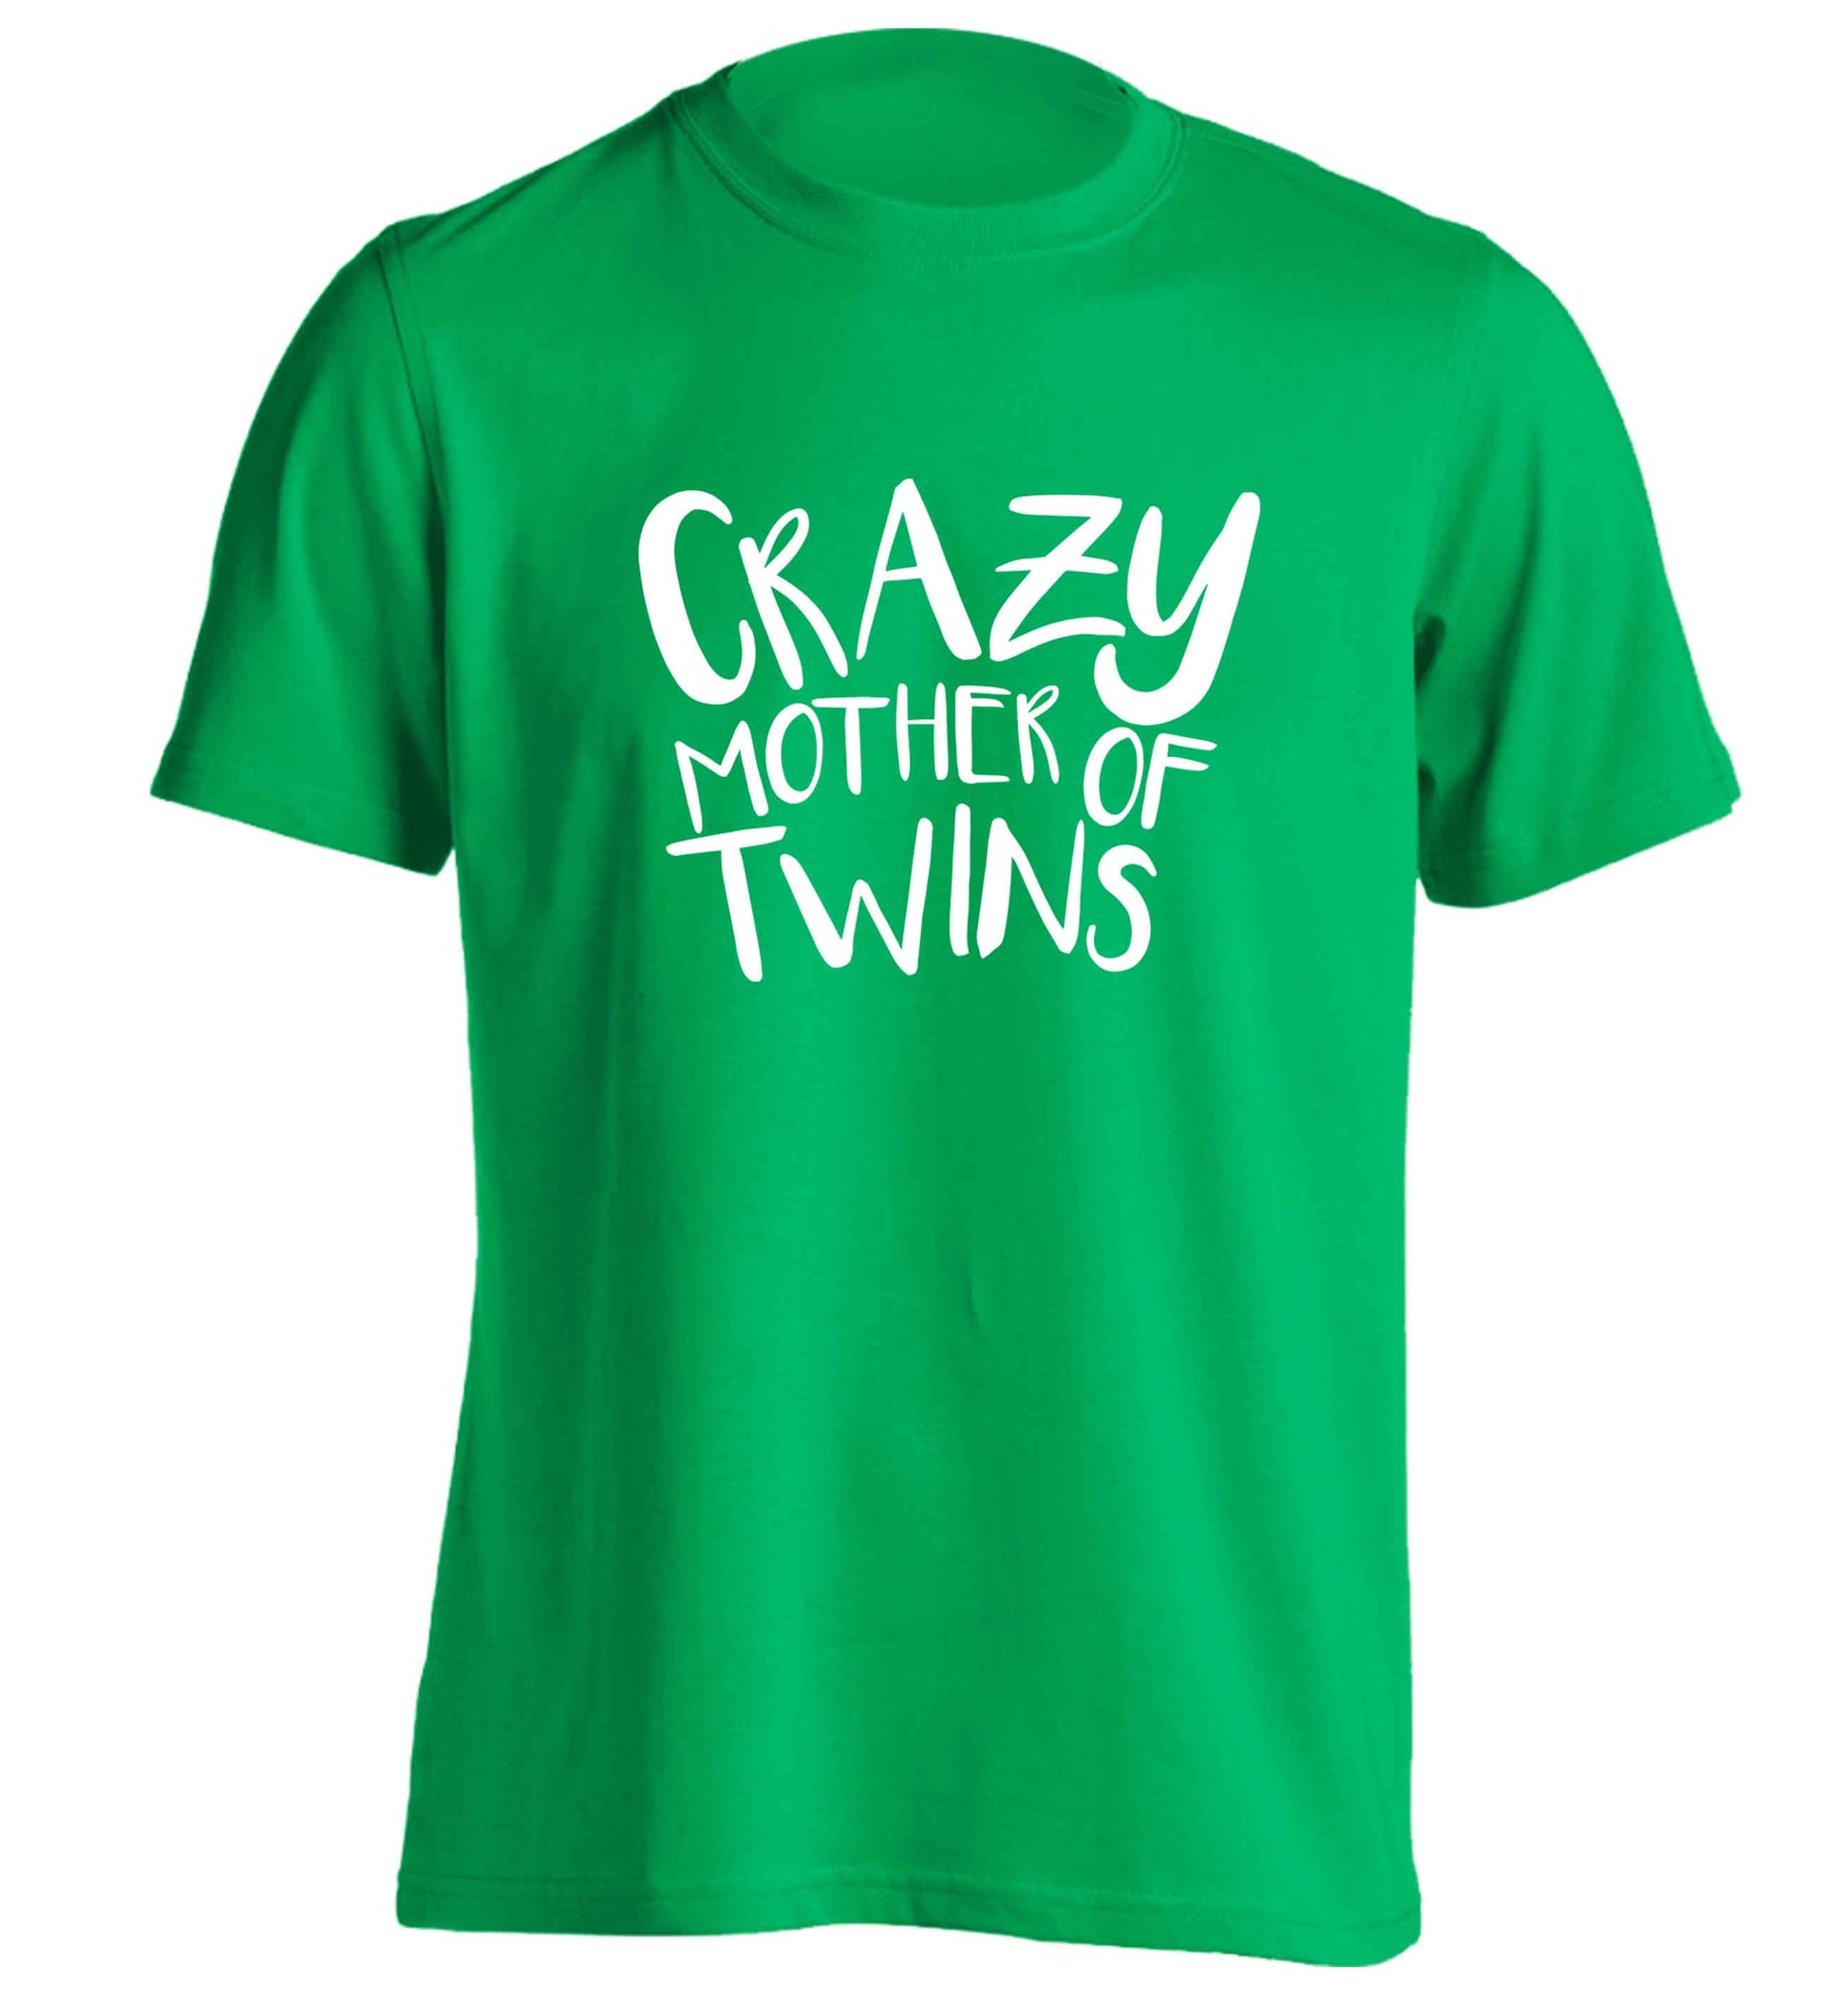 Crazy mother of twins adults unisex green Tshirt small